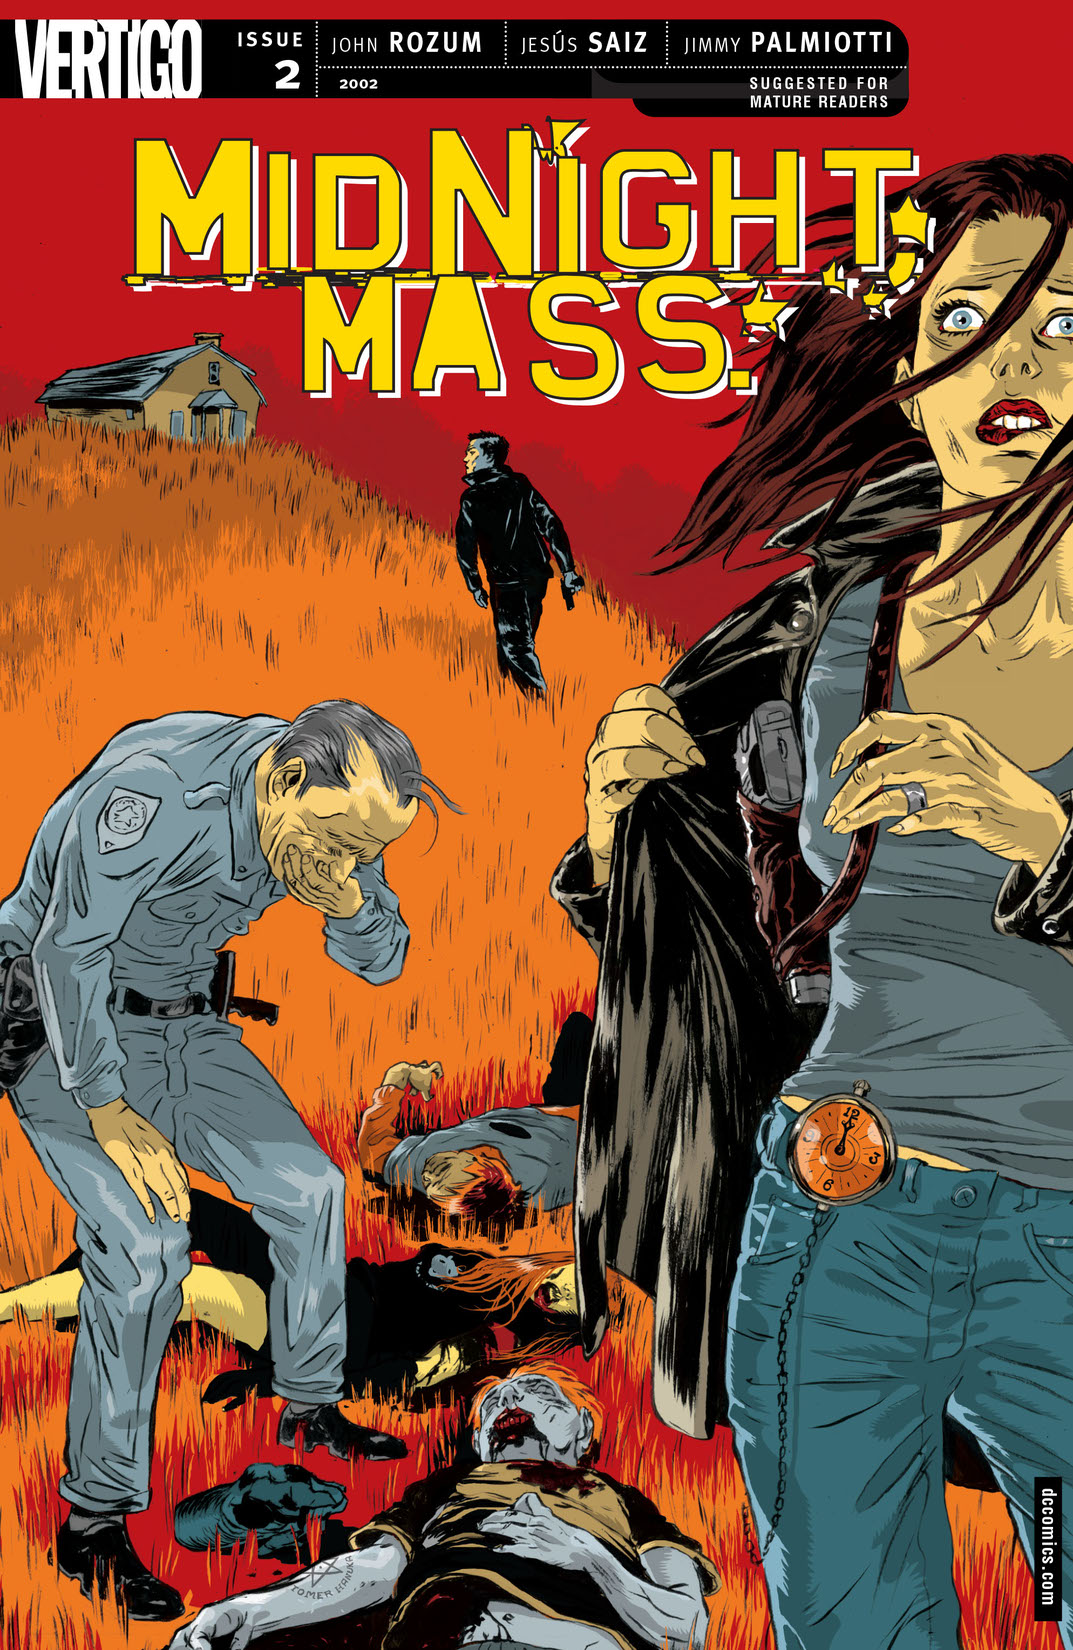 Midnight, Mass #2 preview images